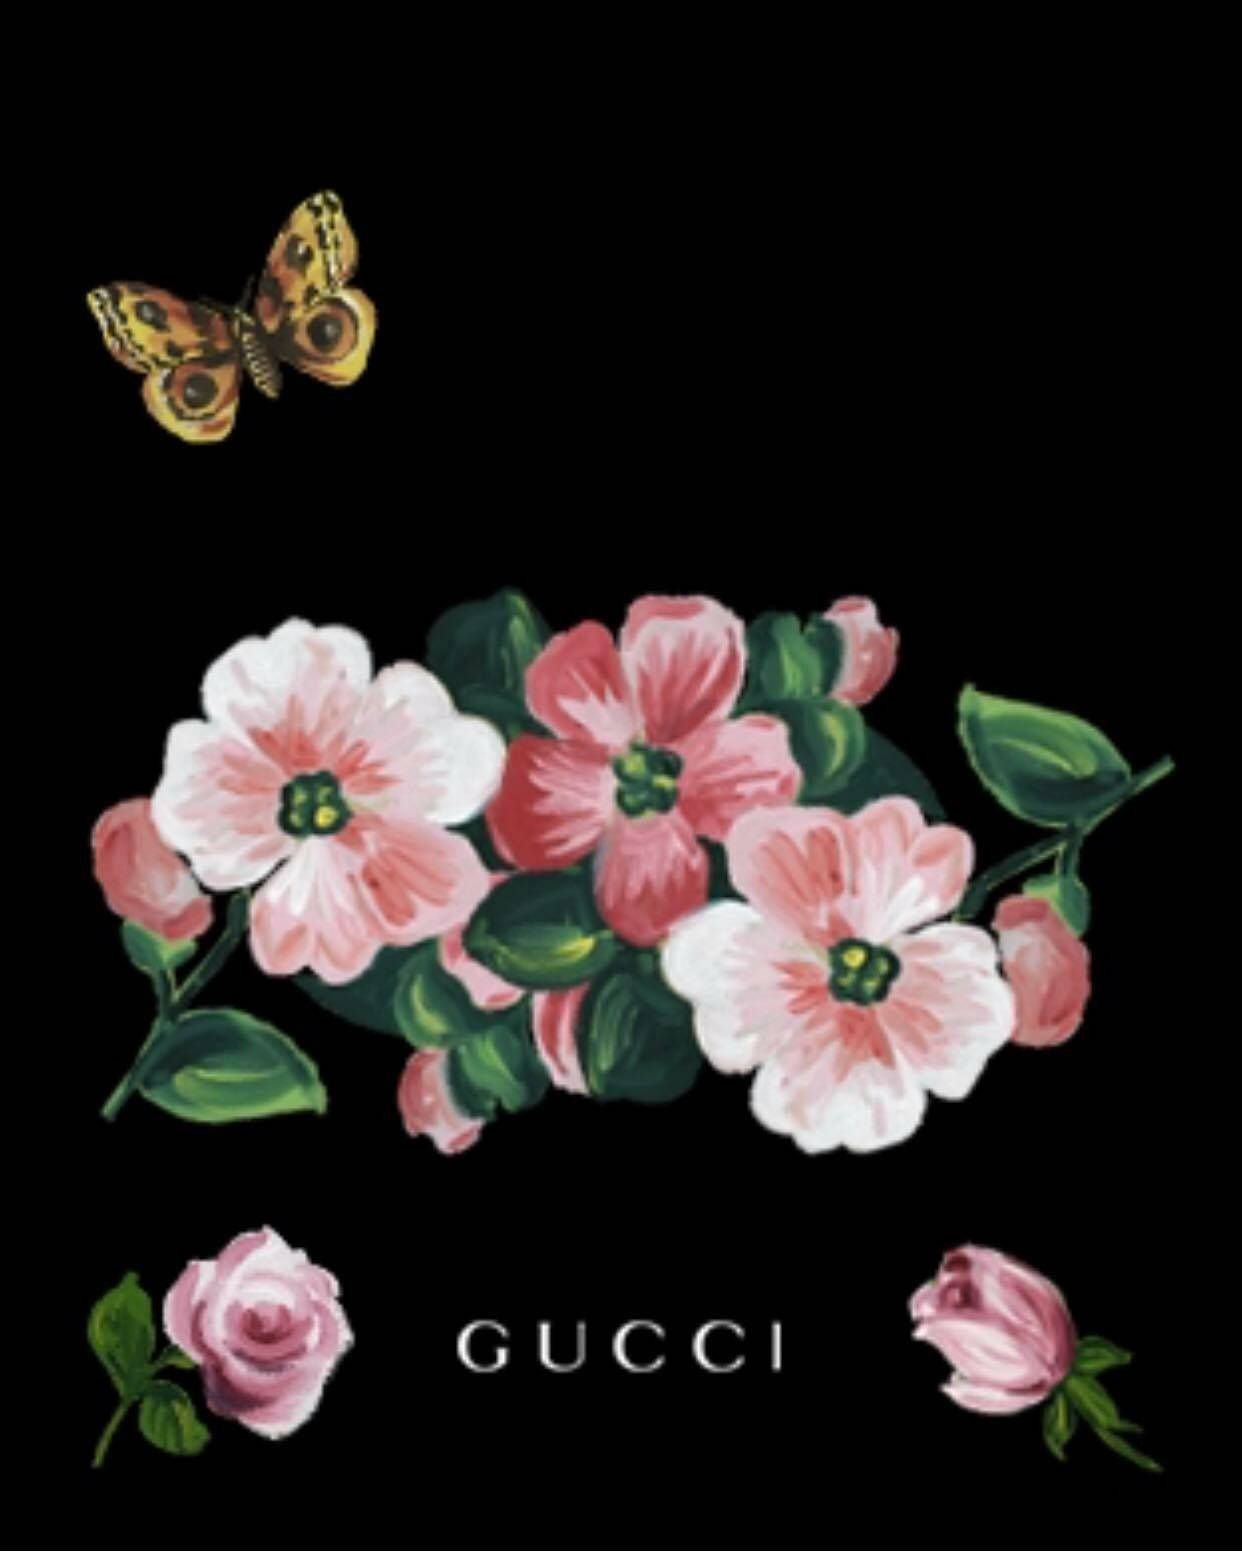 Gucci Floral Butterfly Design Wallpaper